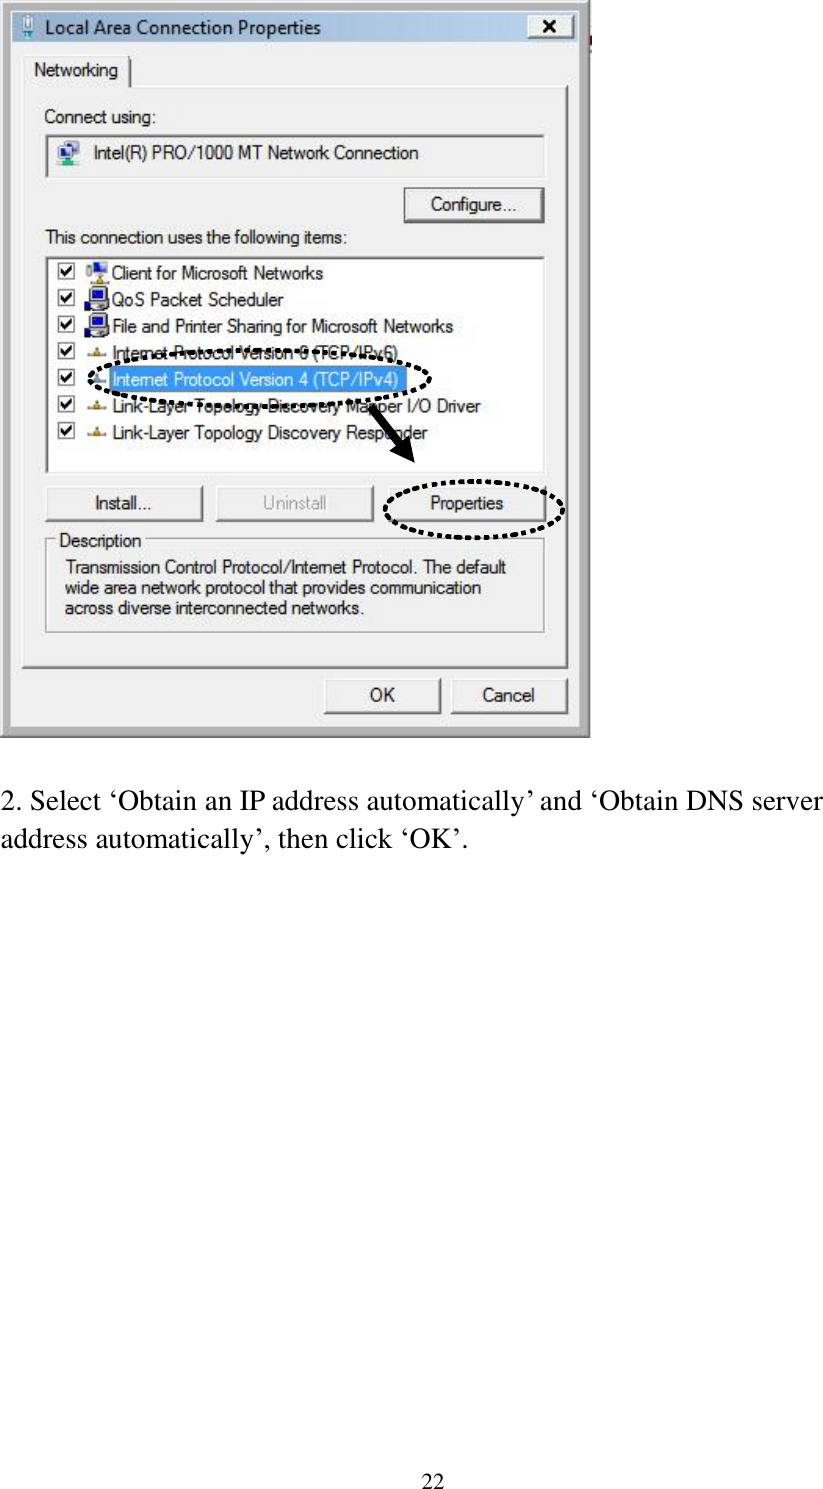 22   2. Select „Obtain an IP address automatically‟ and „Obtain DNS server address automatically‟, then click „OK‟.  